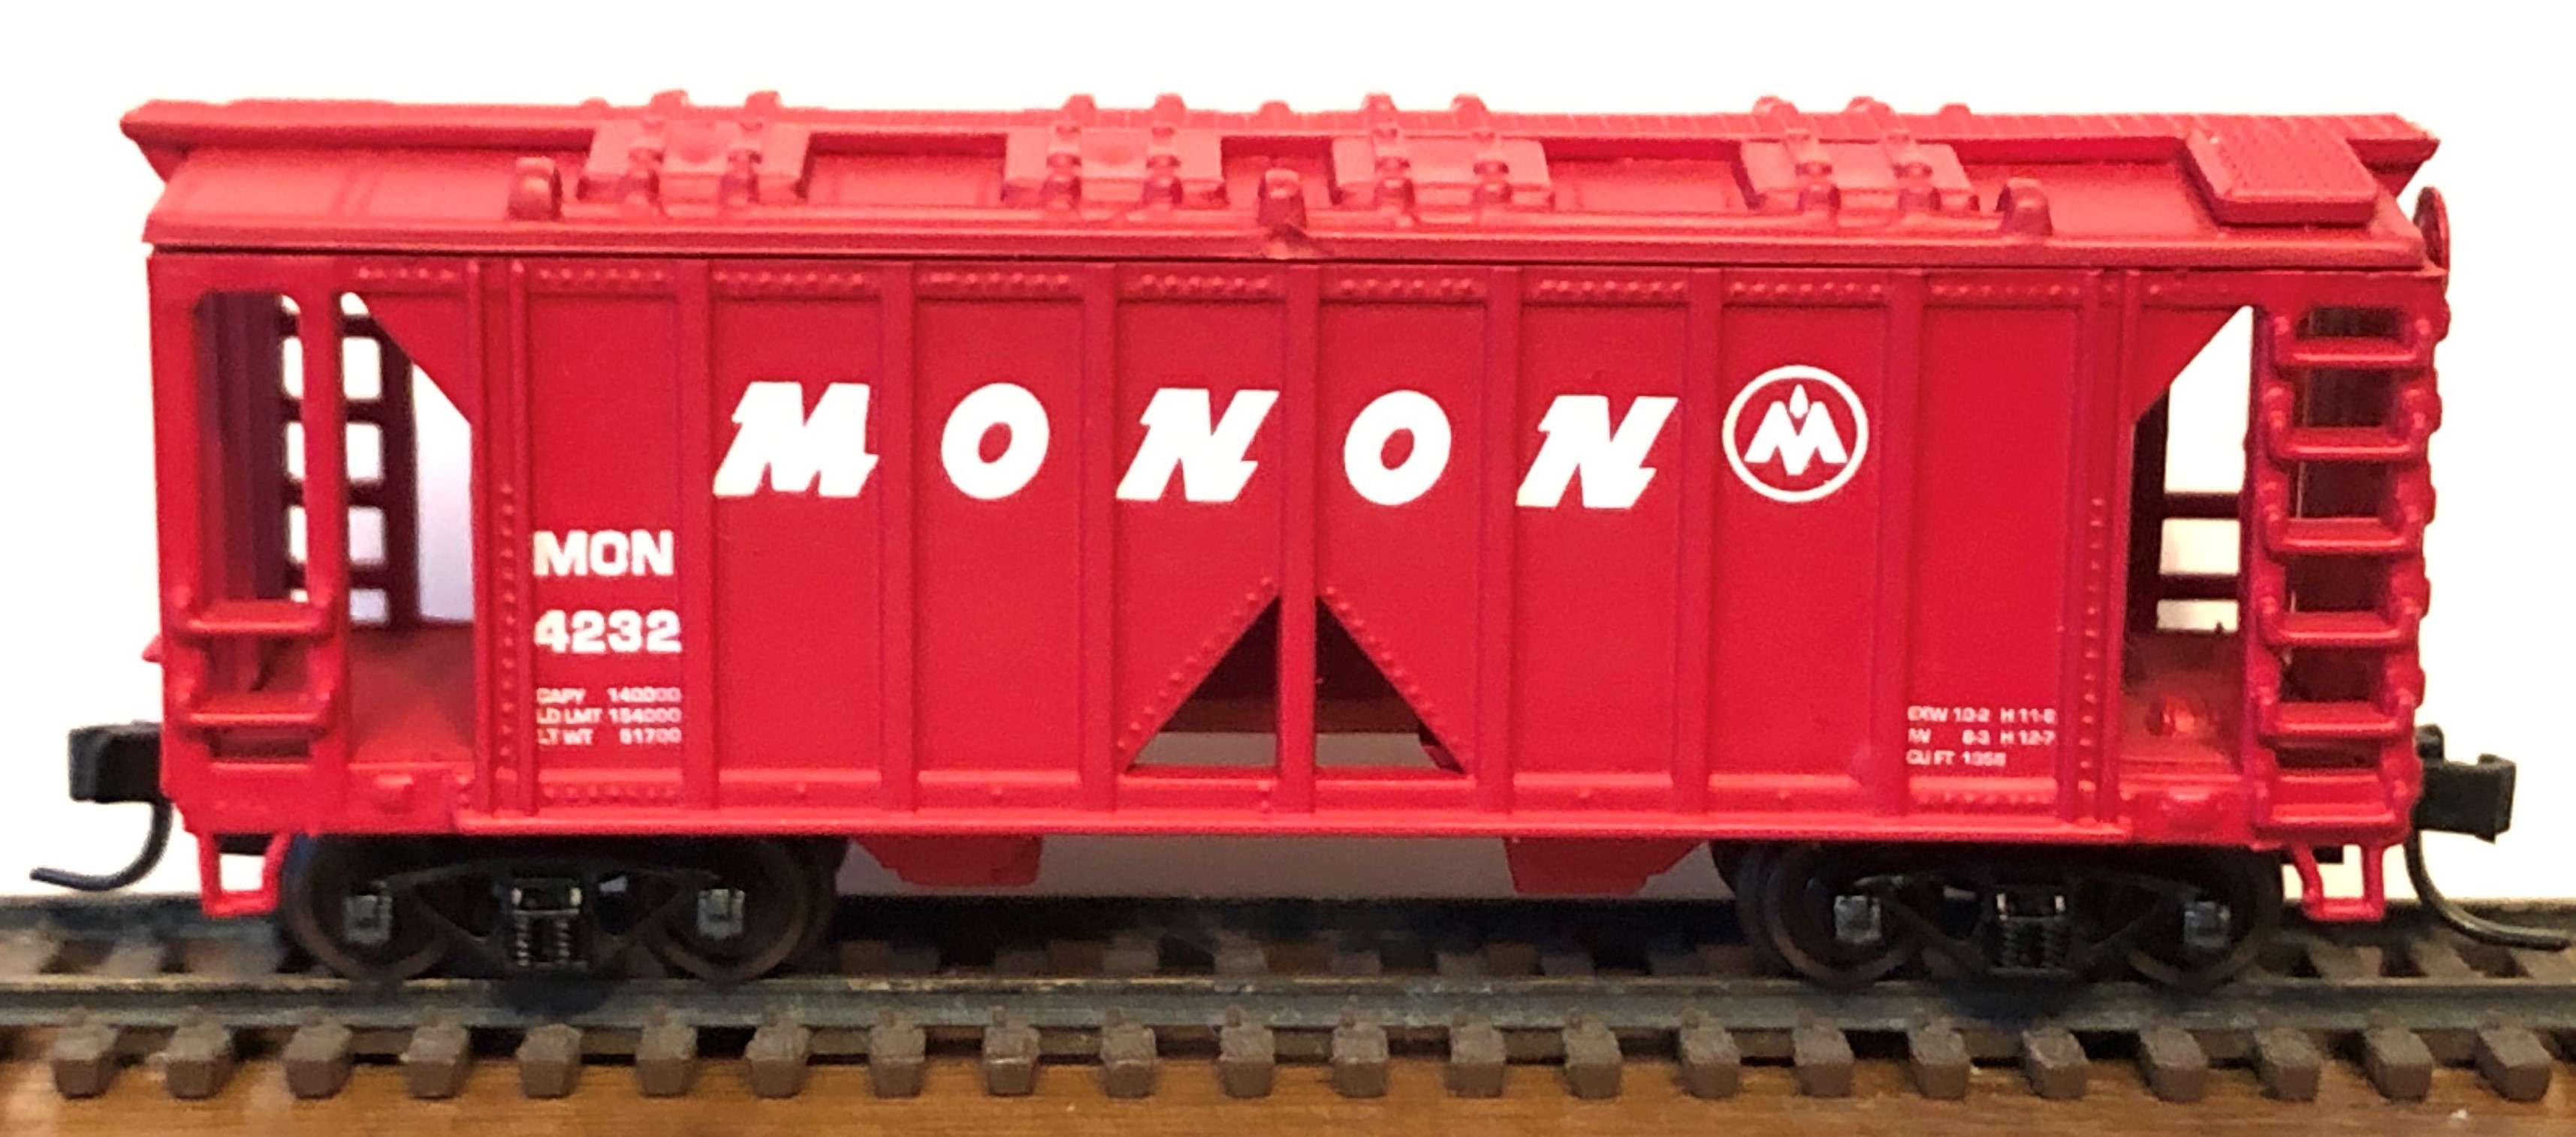 N Scale - Deluxe Innovations - 72602-A - Covered Hopper, 2-Bay, ACF 36 Foot - Monon - 4232